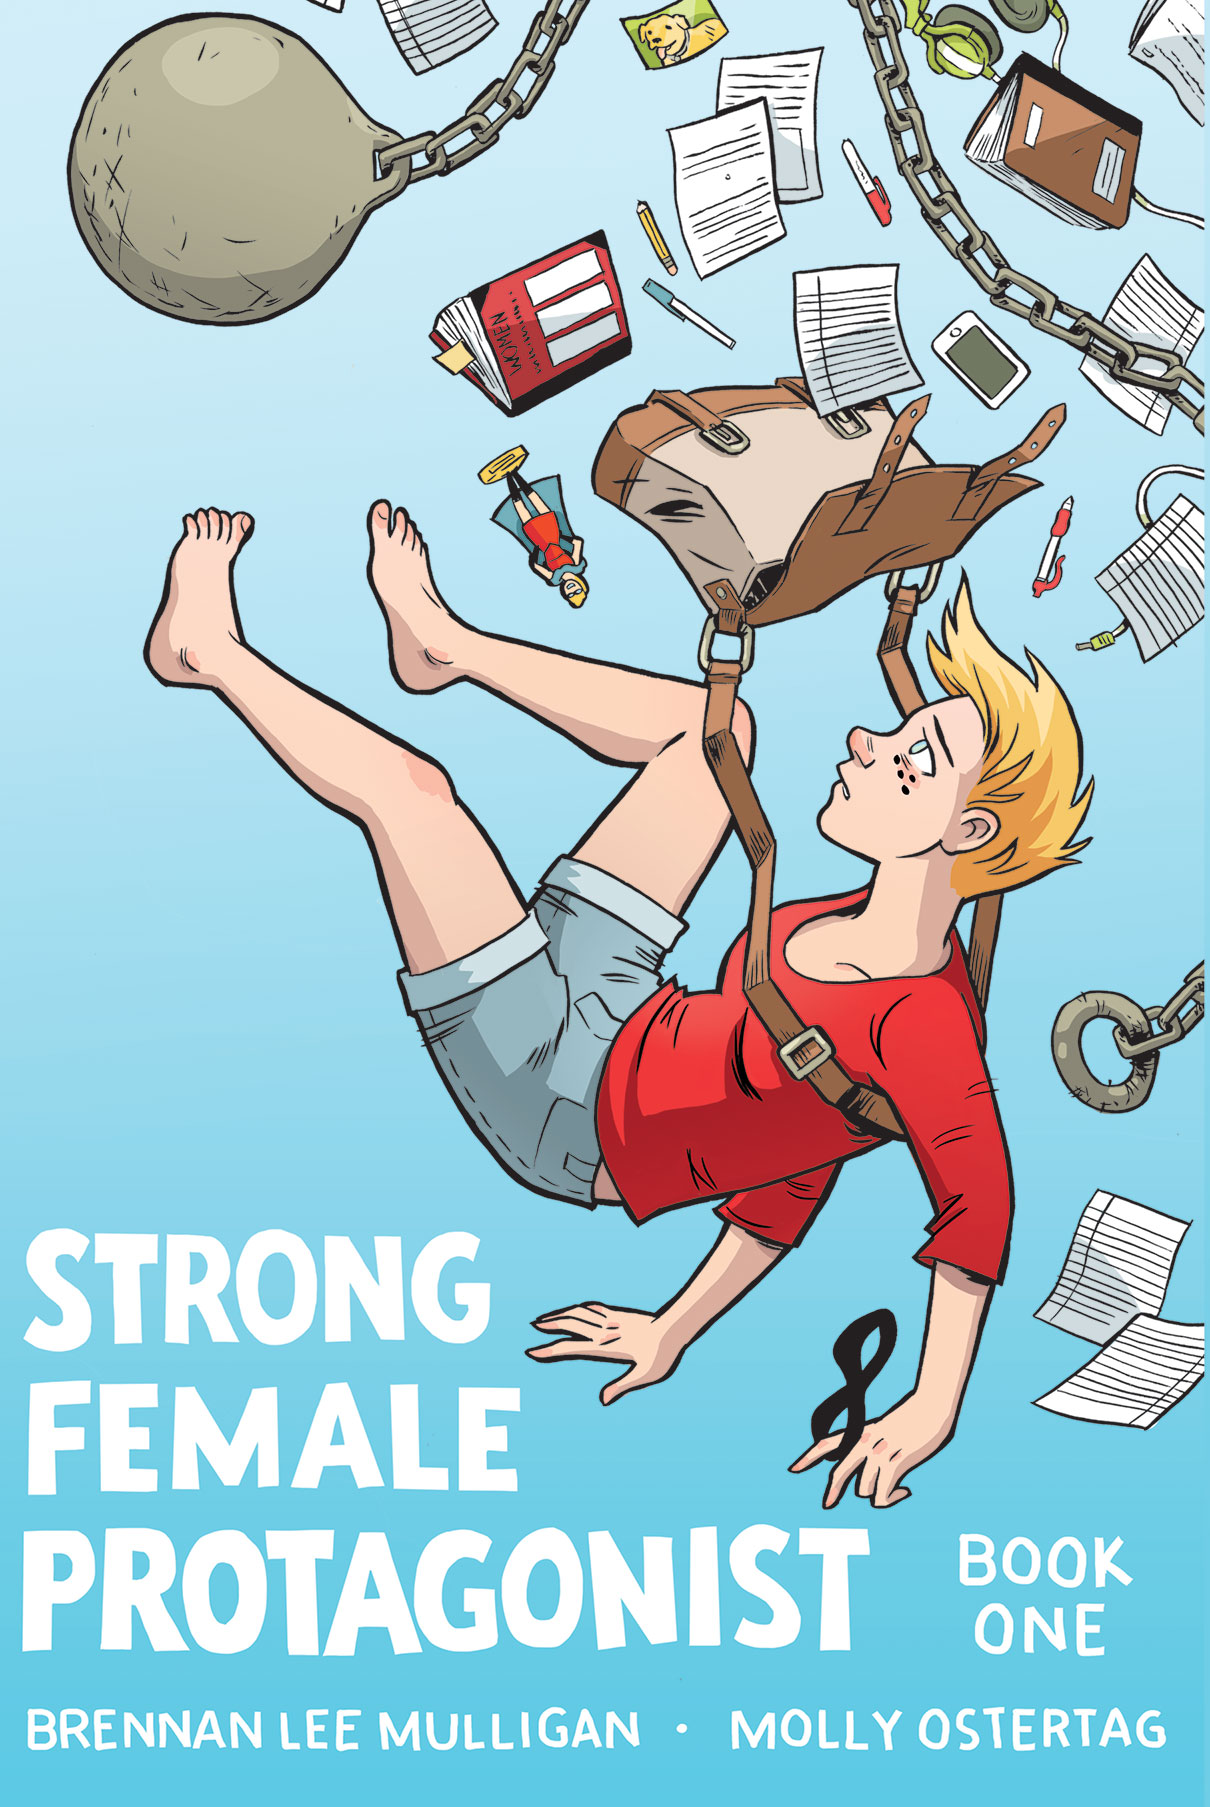 Strong Female Protagonist cover 200dpi